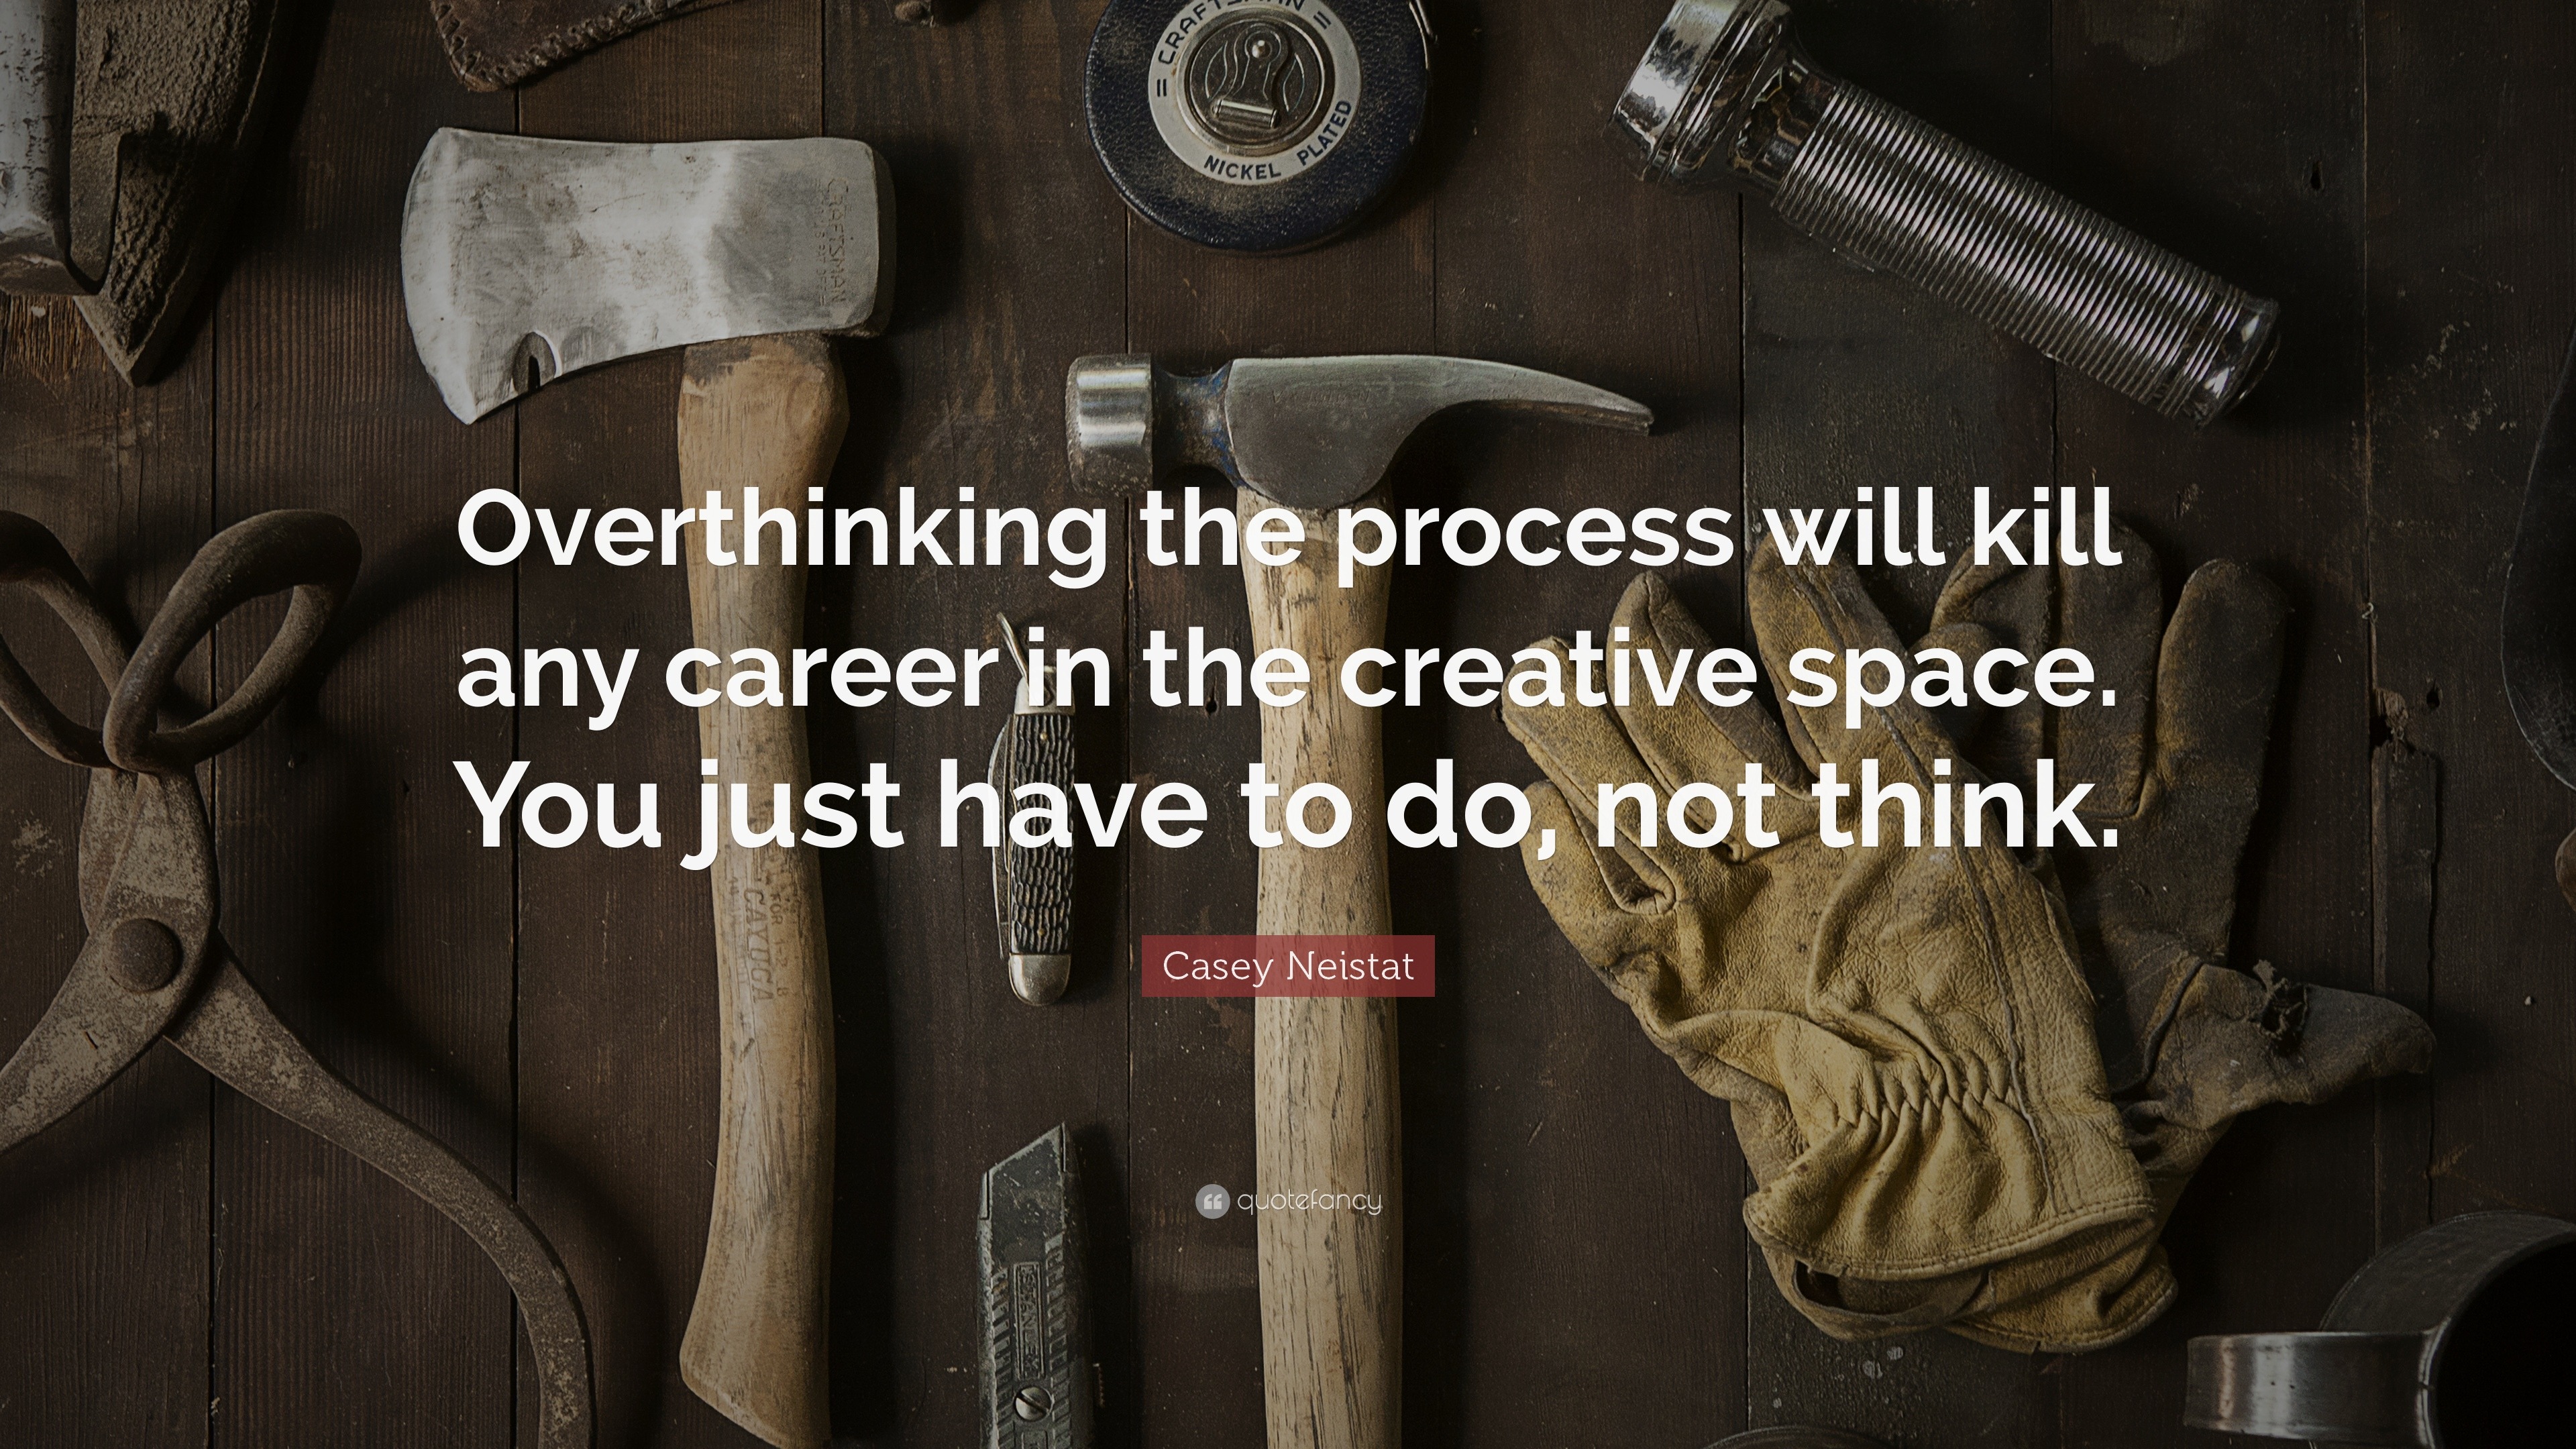 Casey Neistat Quote “Overthinking the process will kill any career in the creative space